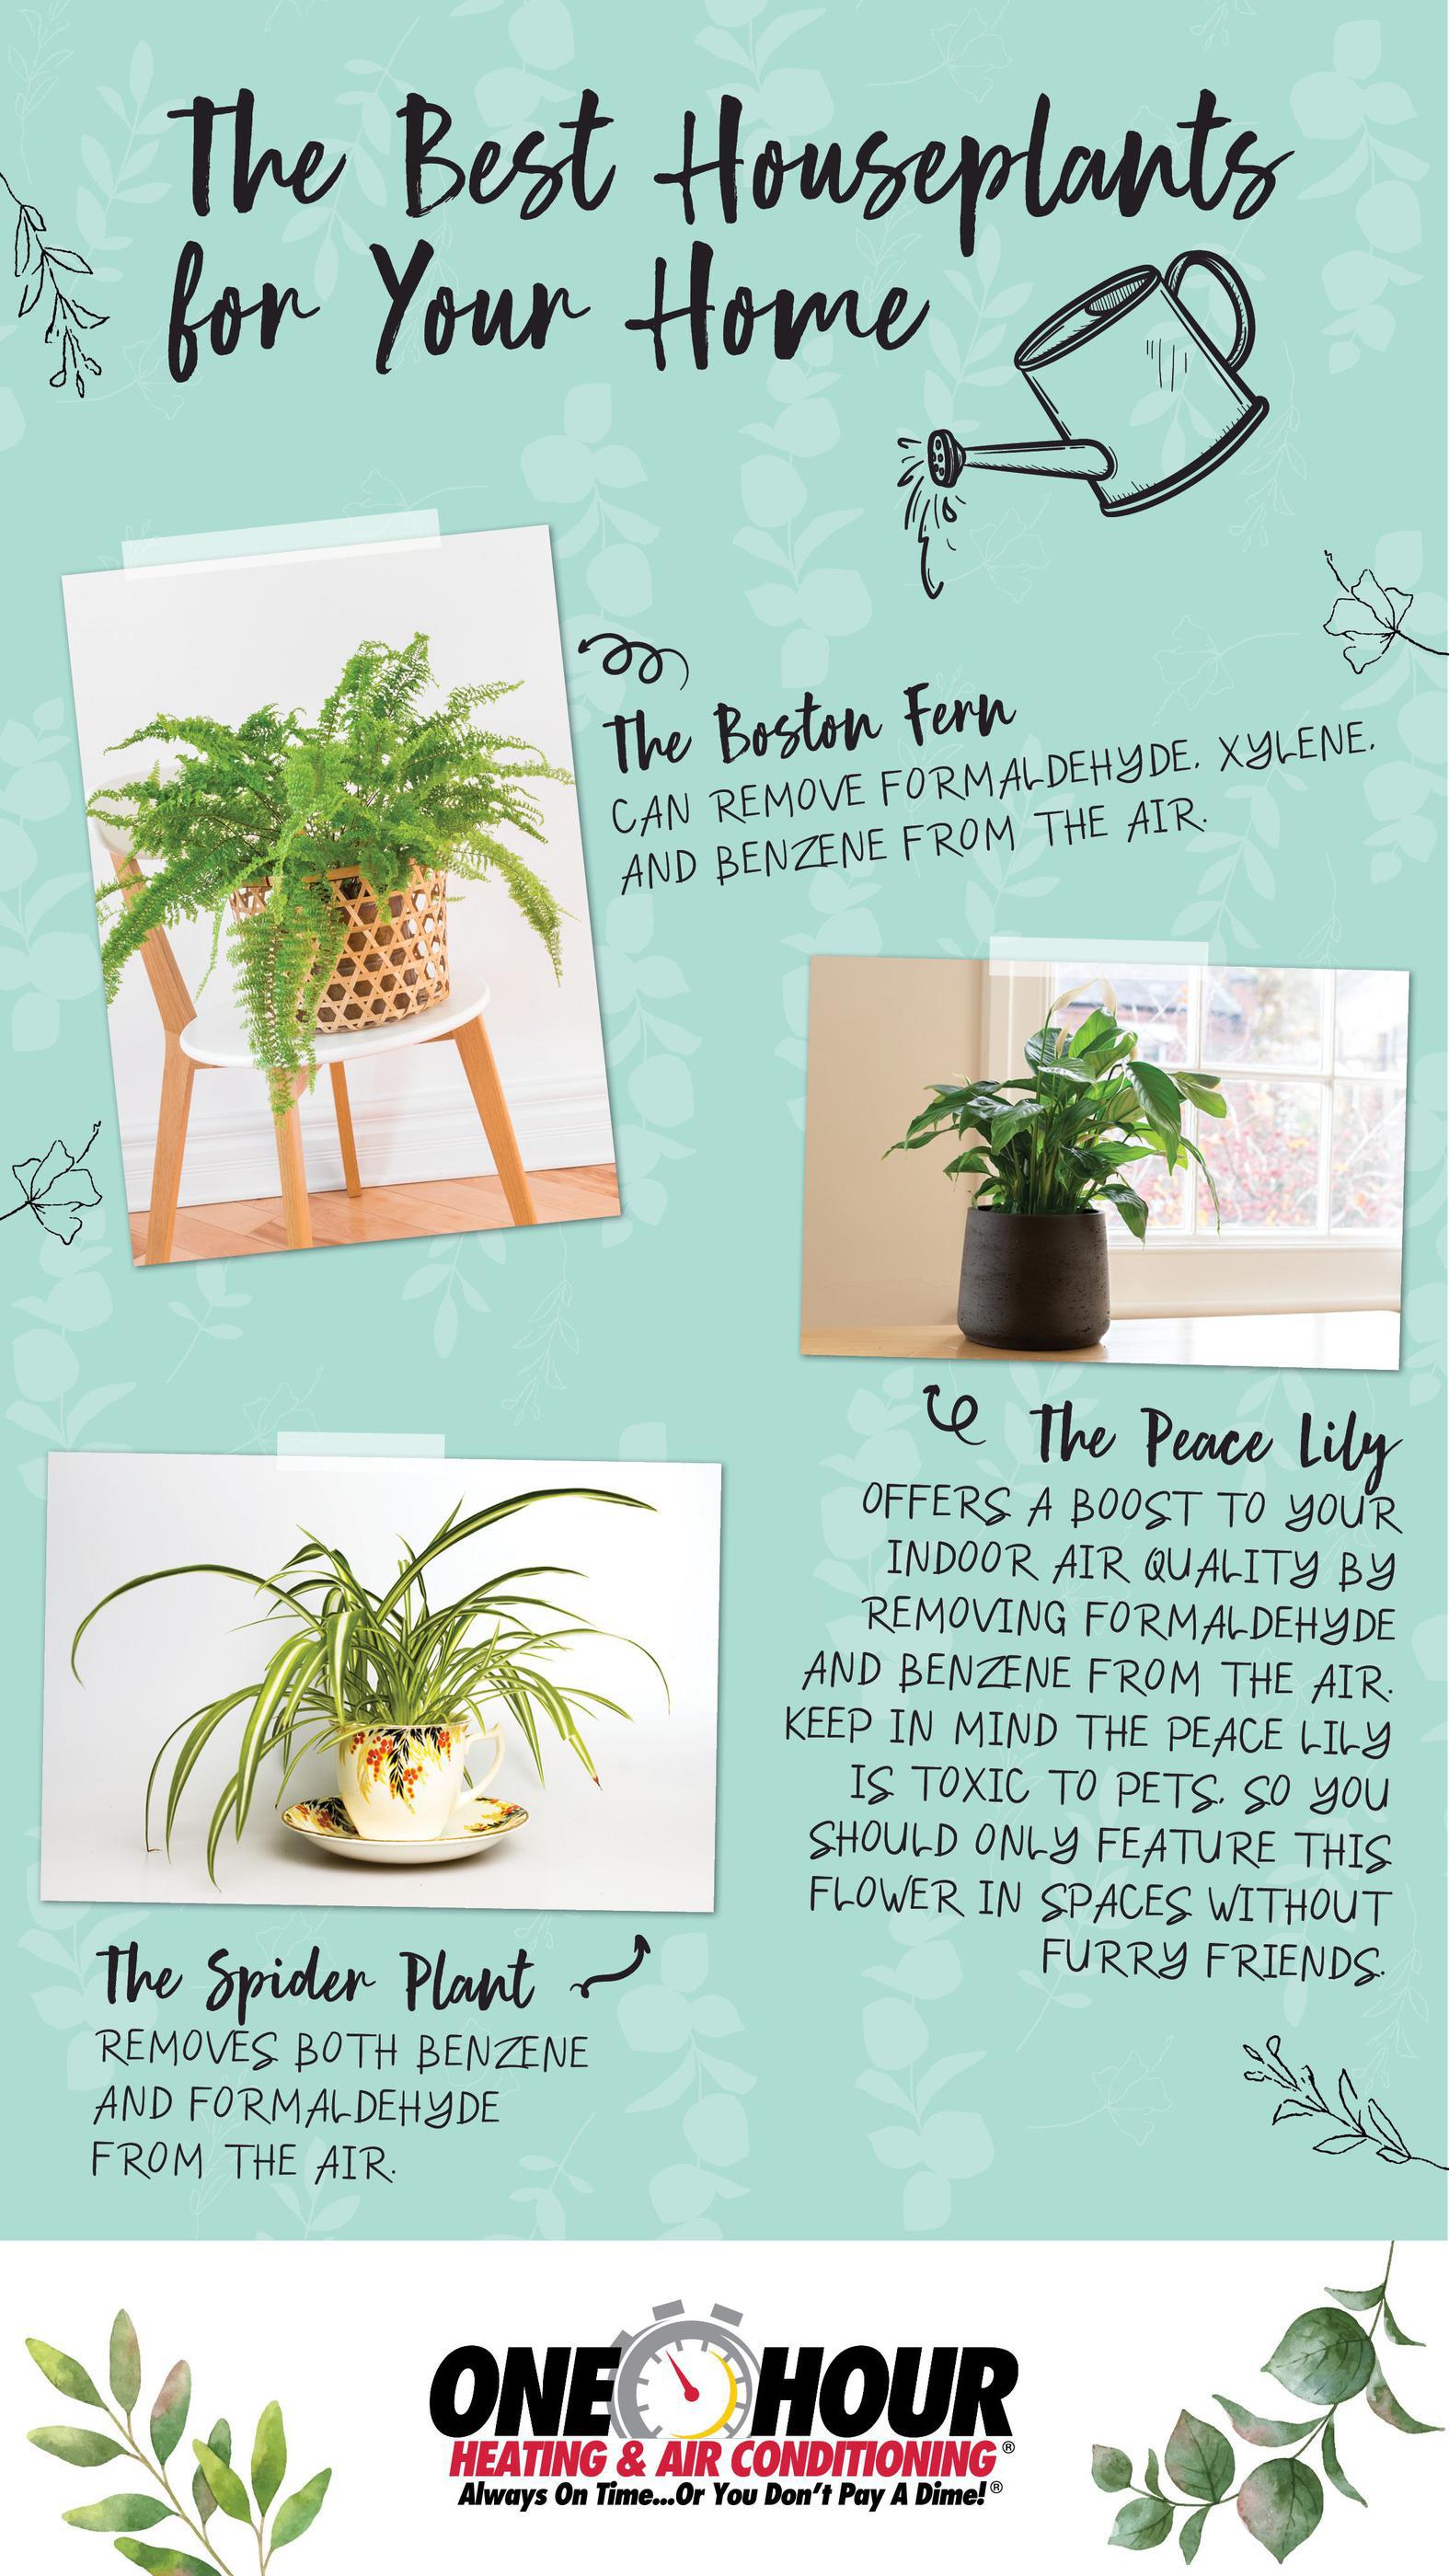 The Best Houseplants for Your Home